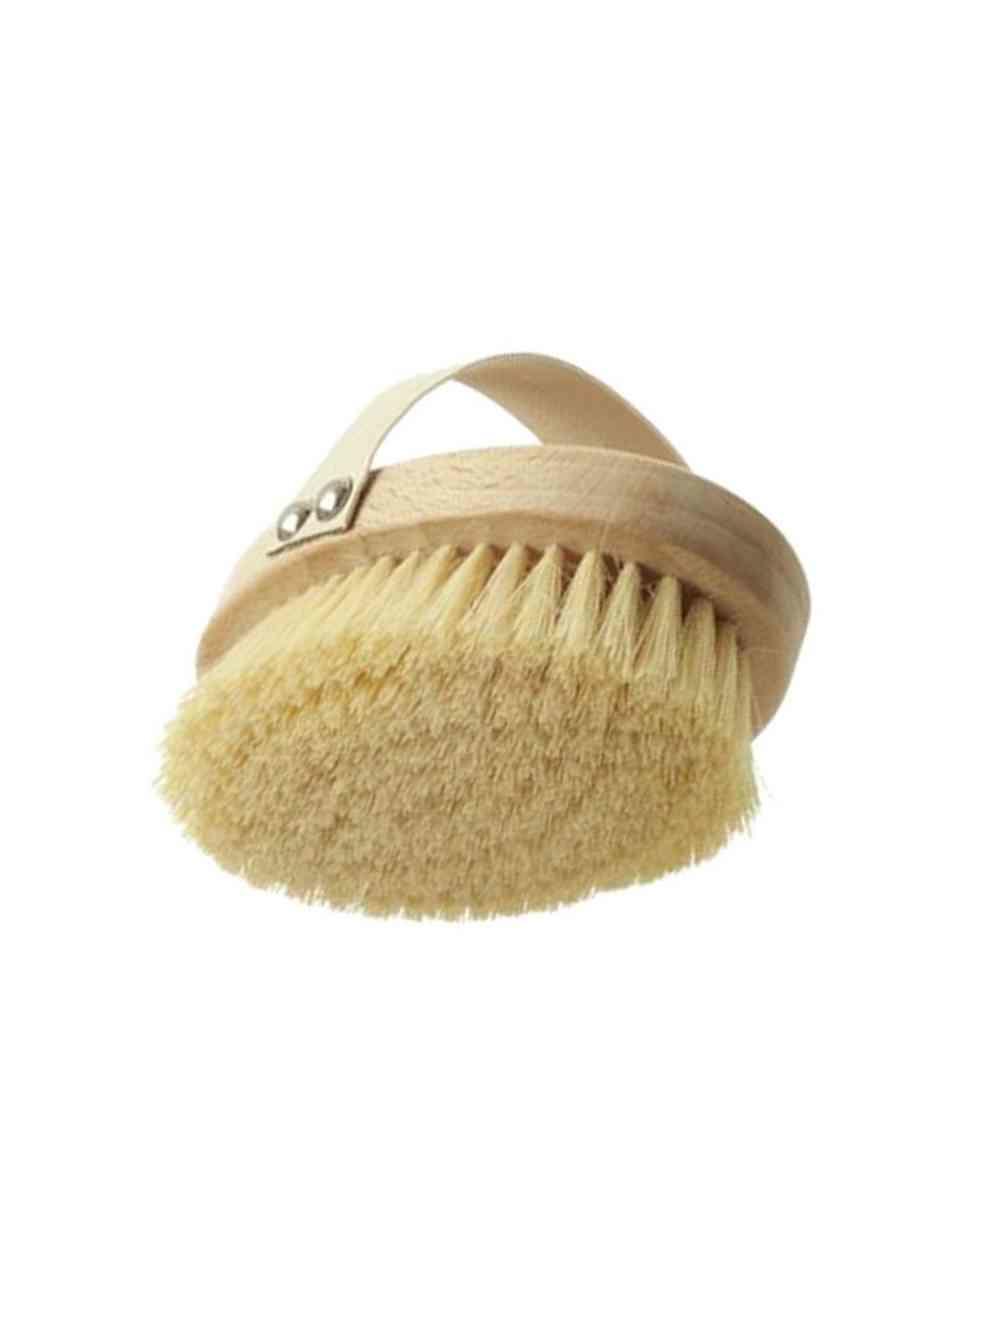 A picture of a body brush suitable for using all over the skin